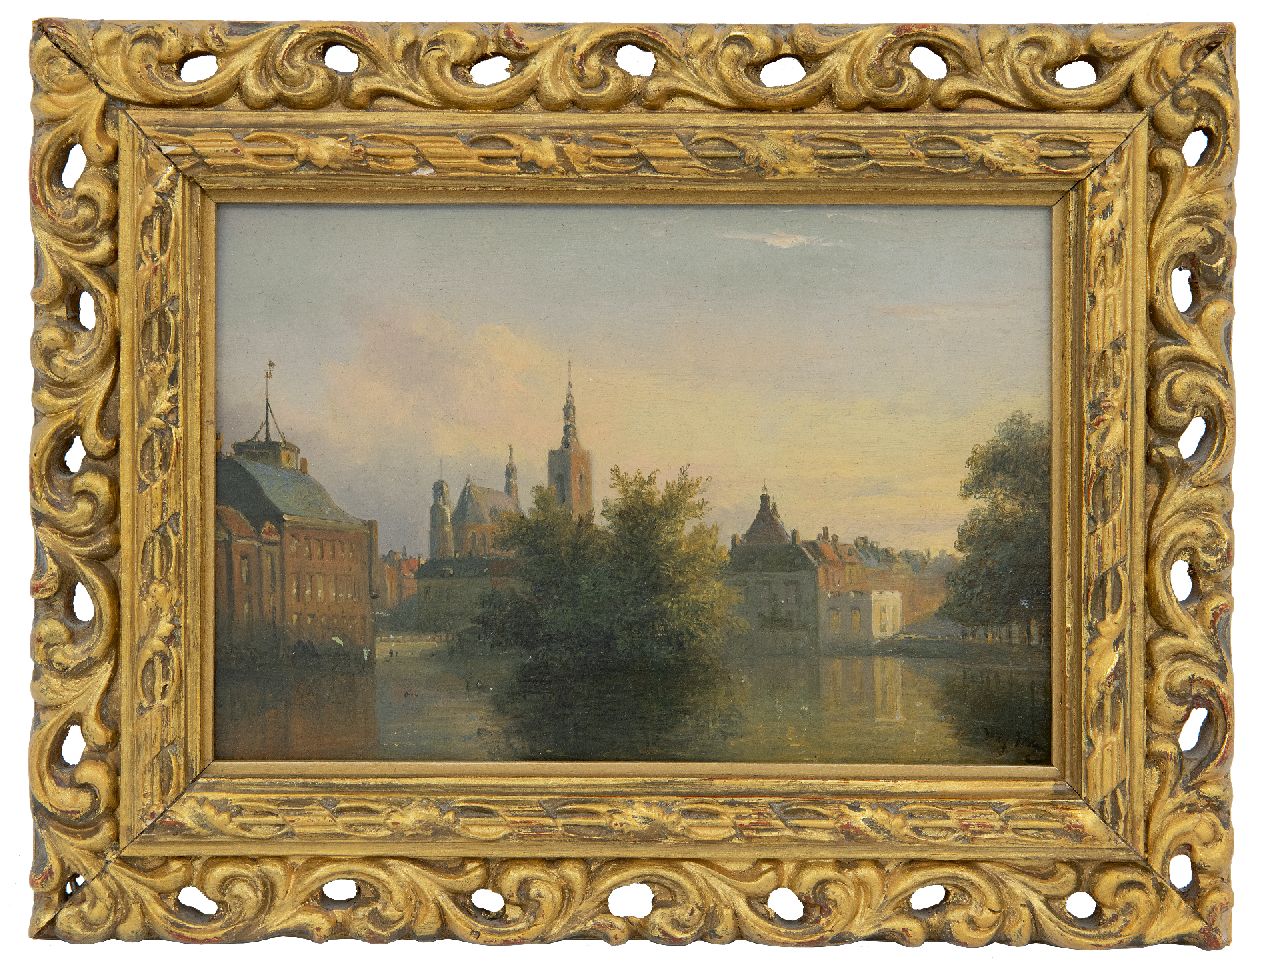 Wagner W.G.  | Willem George Wagner | Paintings offered for sale | A view of the 'Hofvijver', The Hague, oil on panel 13.1 x 18.7 cm, signed l.r.